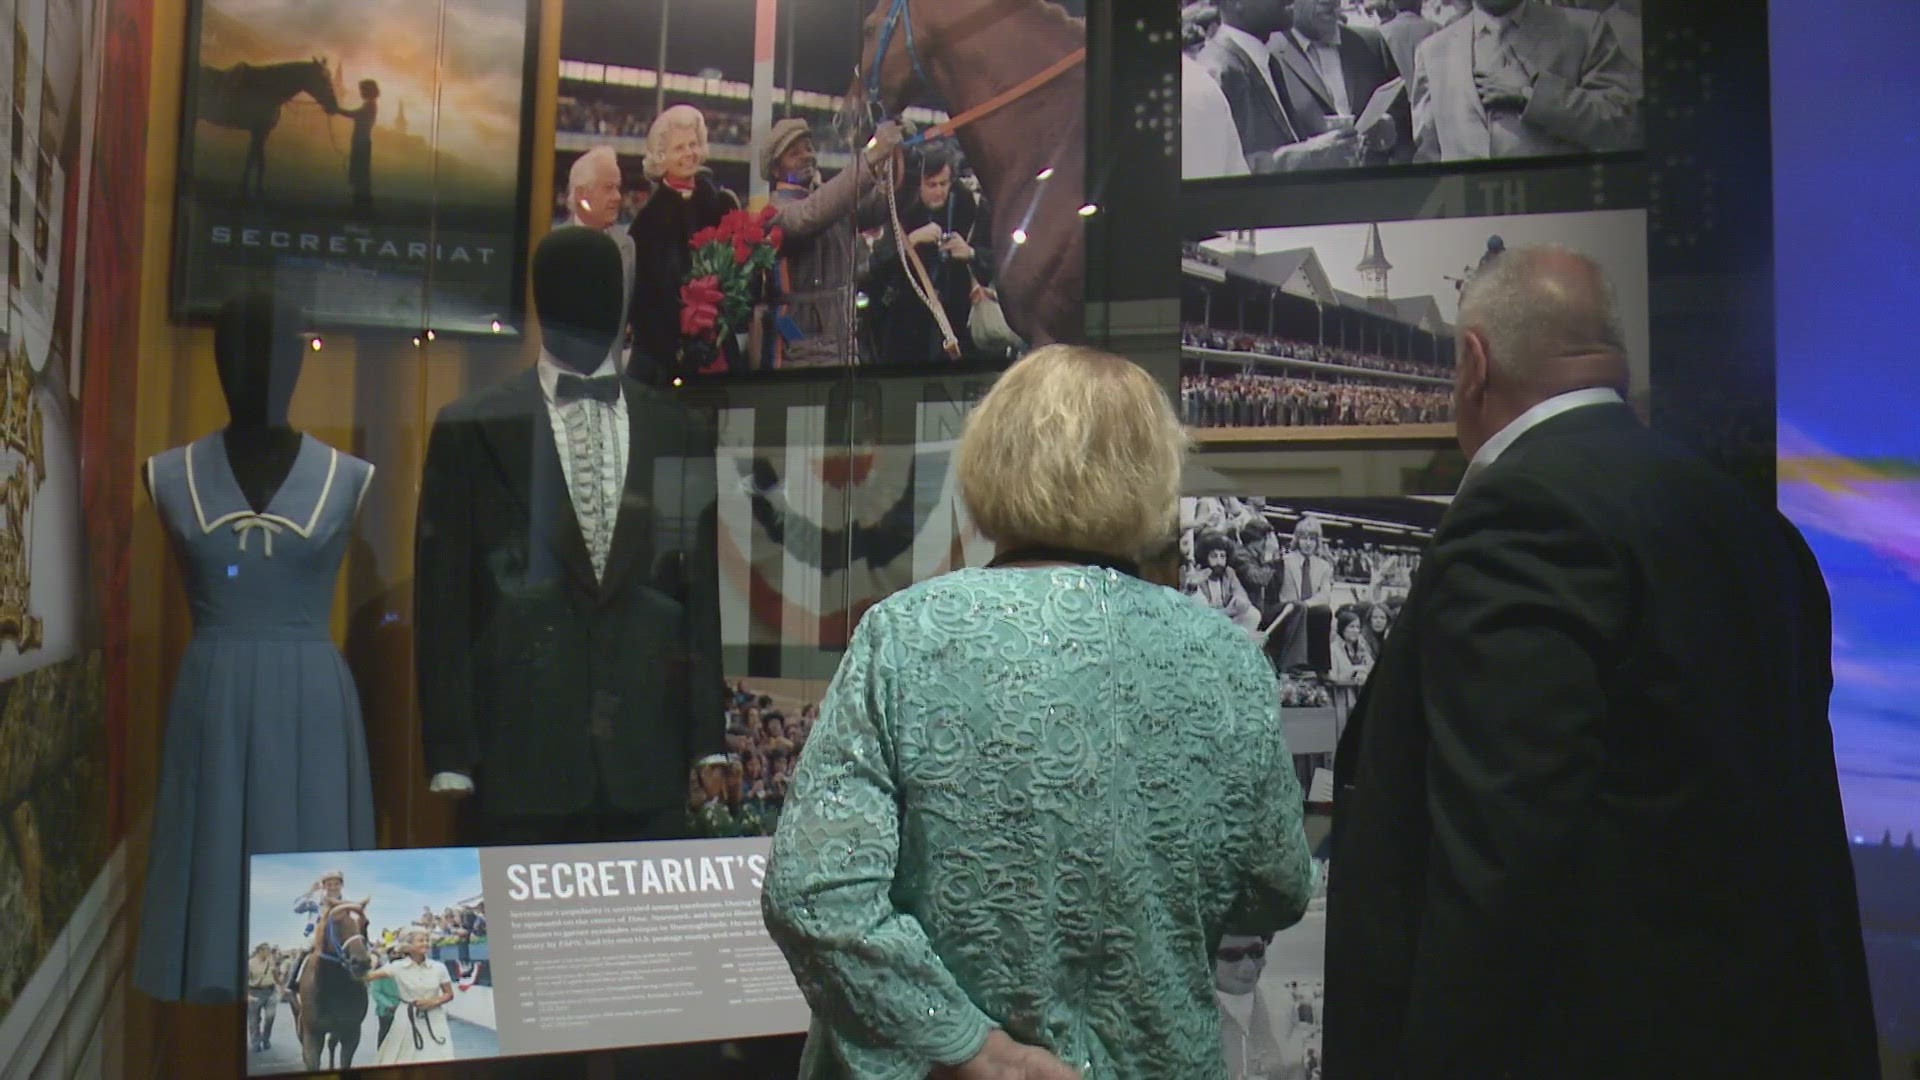 It's called Secretariat: America's Horse and will showcase his life and impact on horse racing.